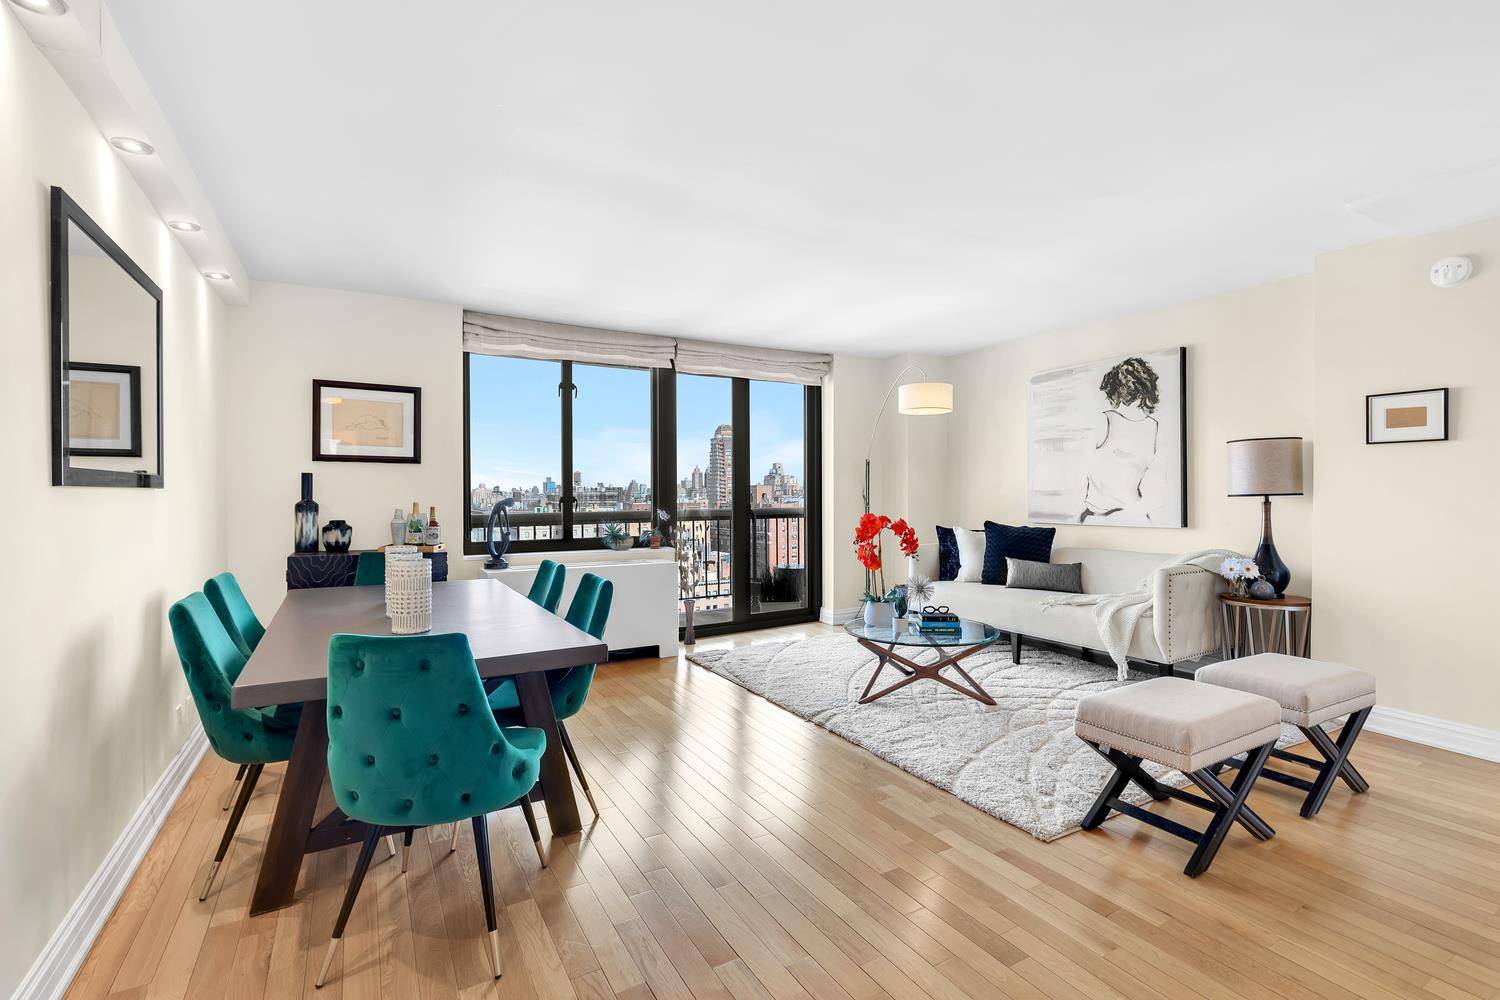 Welcome to Residence 22B, a fabulous, move in ready three bedroom, three bathroom home at the desirable Maison East Condominium located between 81st and 82nd Streets on Manhattan's Upper East ...